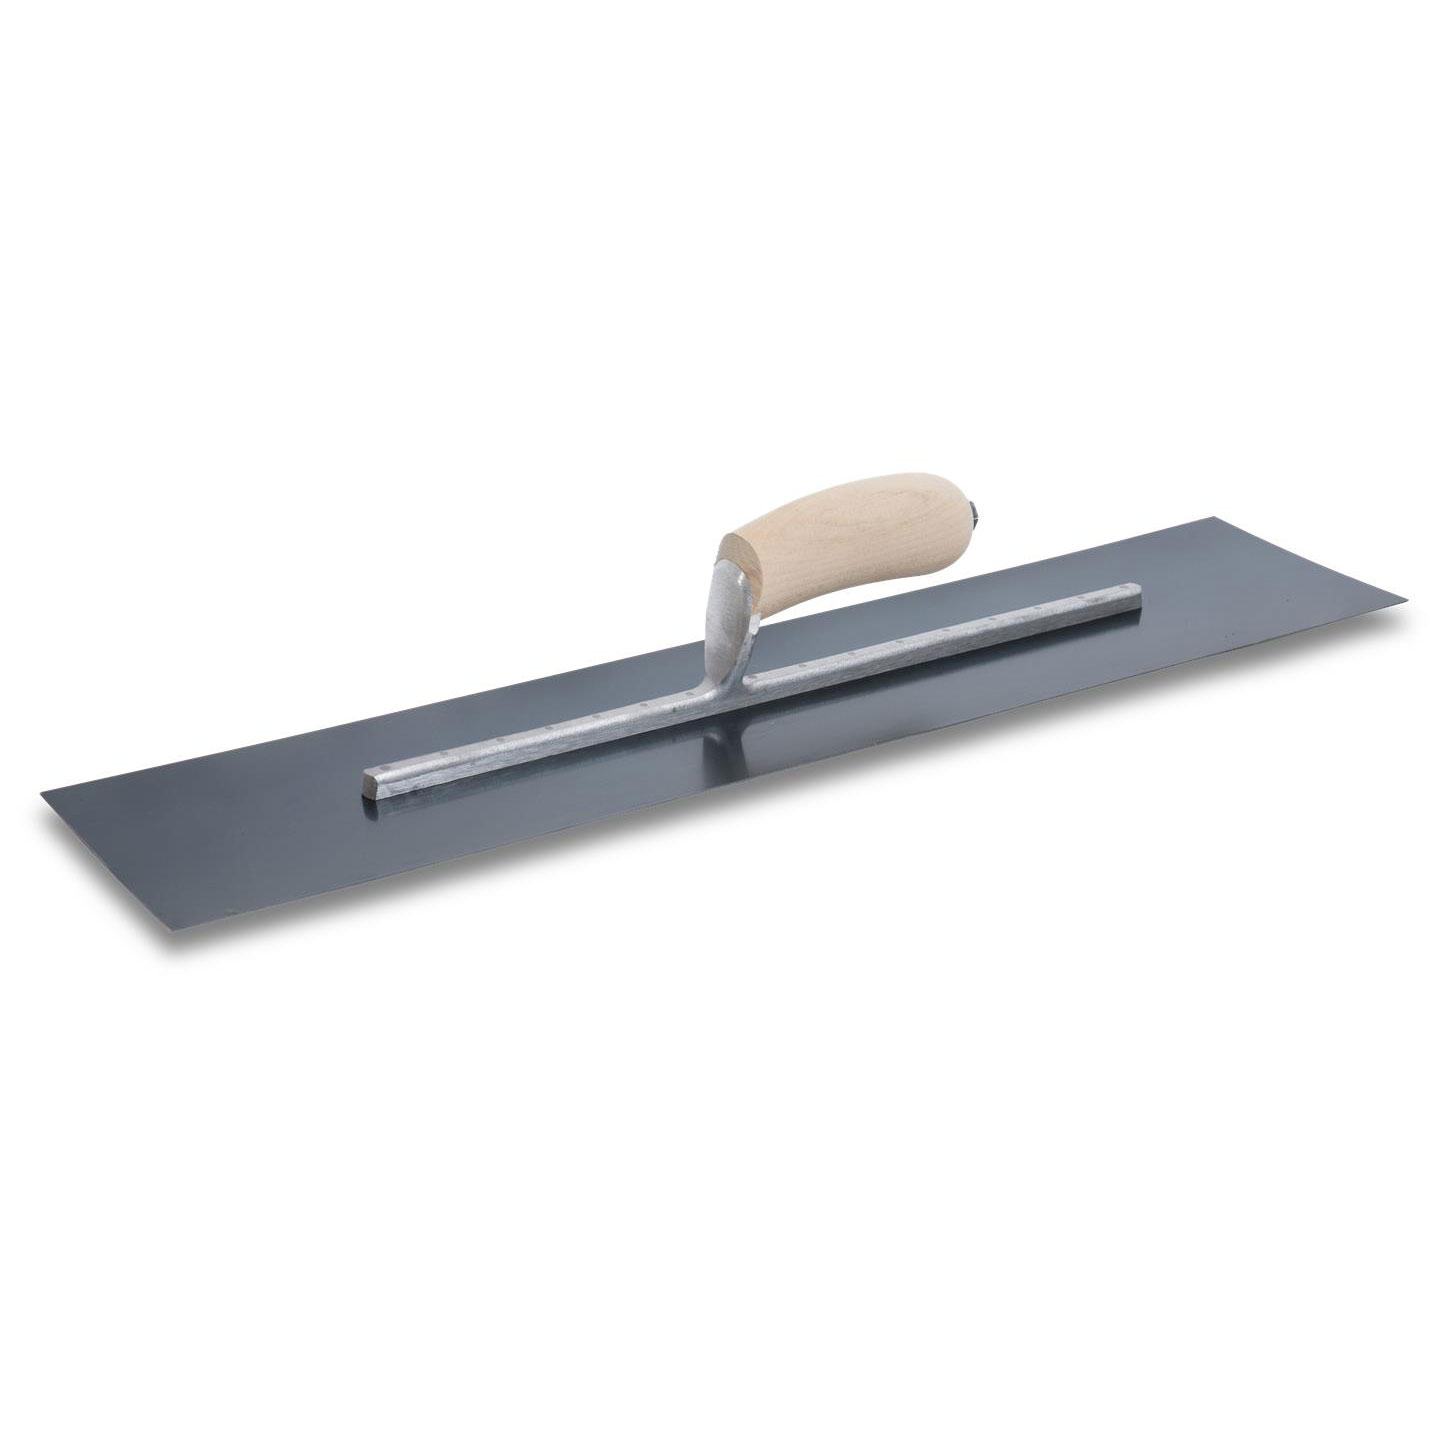 Marshalltown MXS244B 24in x 4in Blue Steel Finishing Trowel with Curved Wood Handle MXS244B